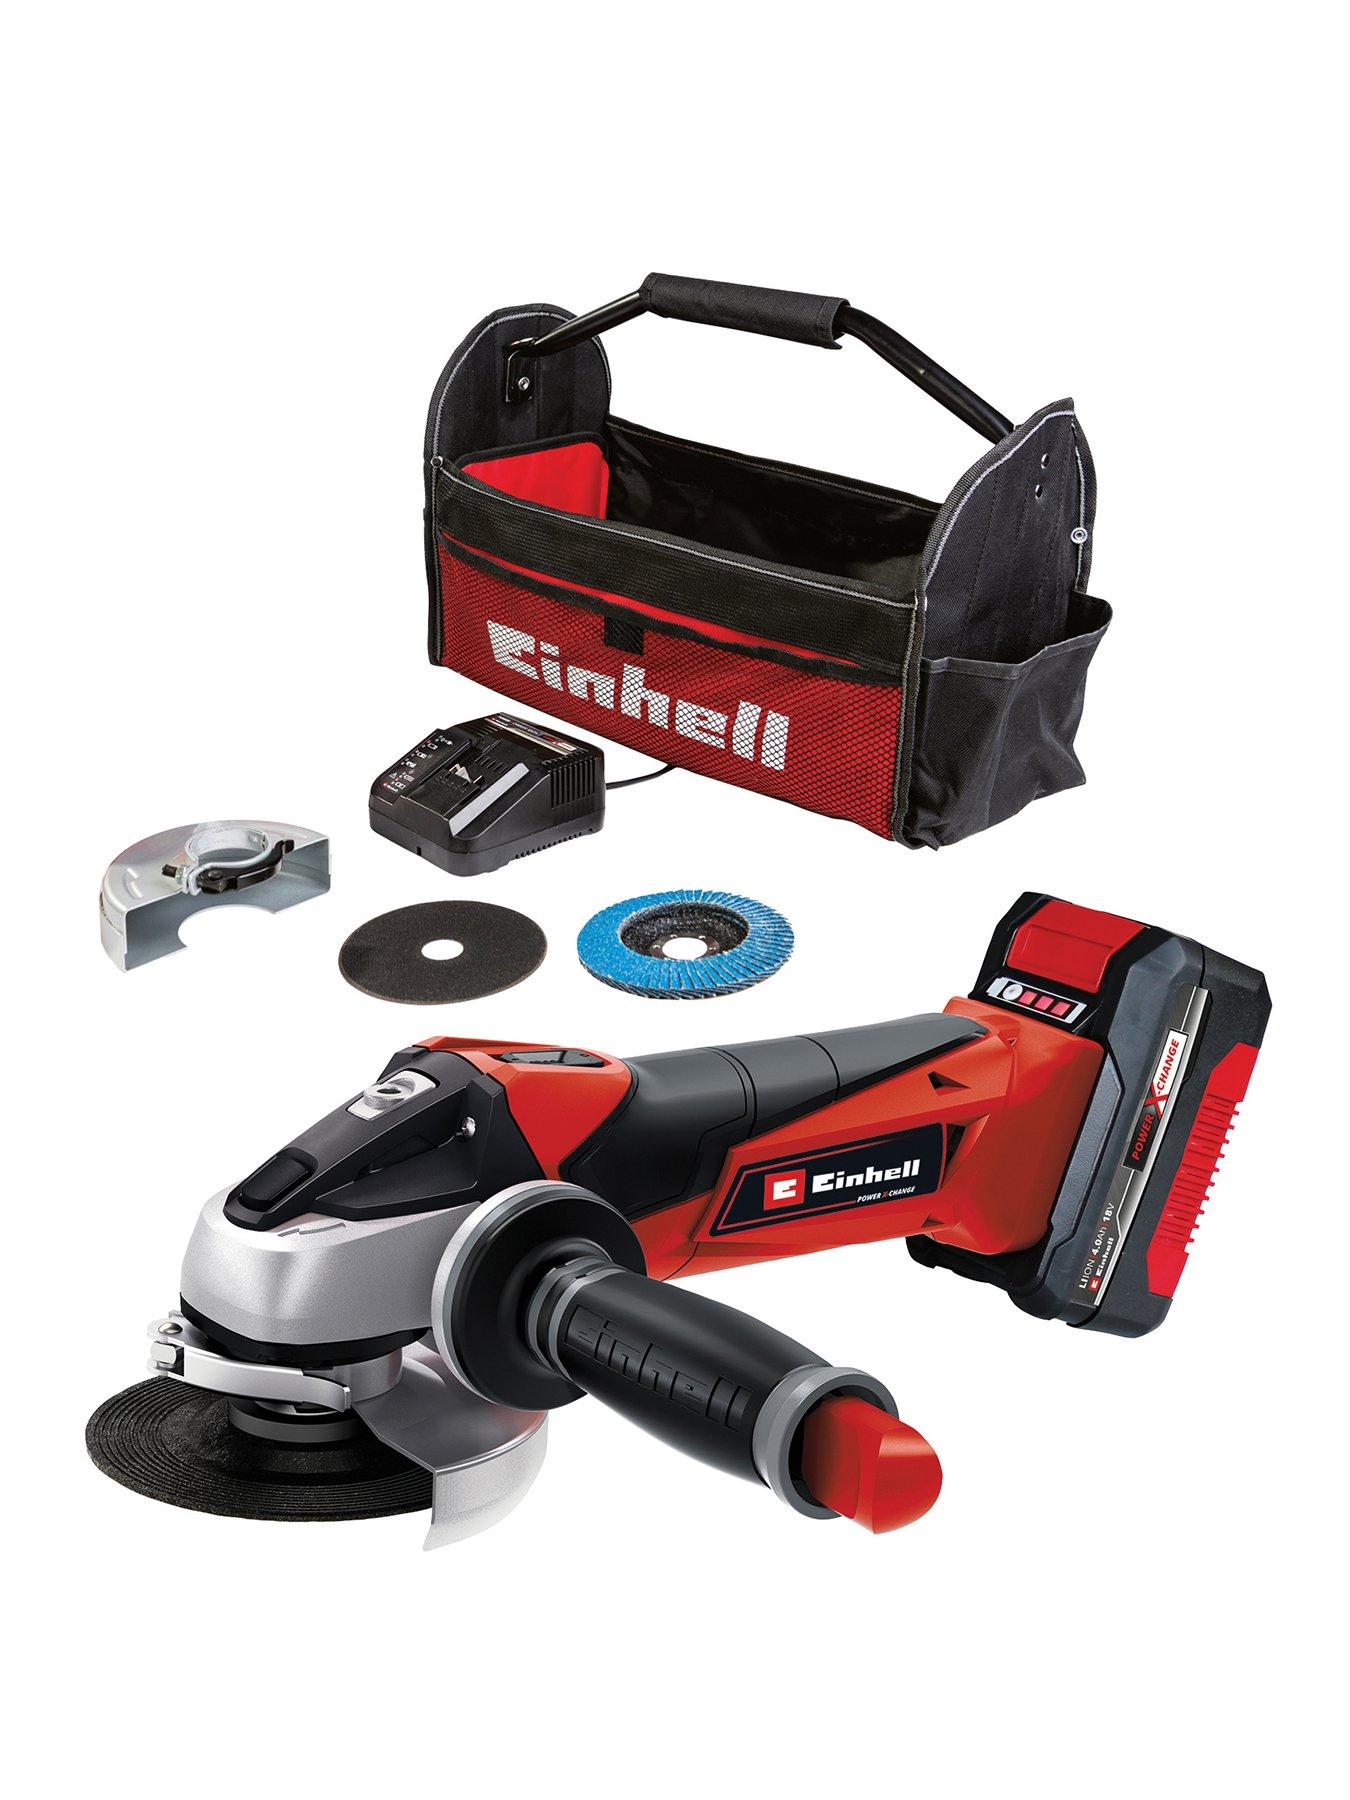 Einhell TE-AG 18/115 Li Kit Power X-Change Battery Angle Grinder (18 V, 115  mm Disc Diameter, 28 mm Cutting Depth, Incl. 3.0 Ah Battery and Charger),  Red 